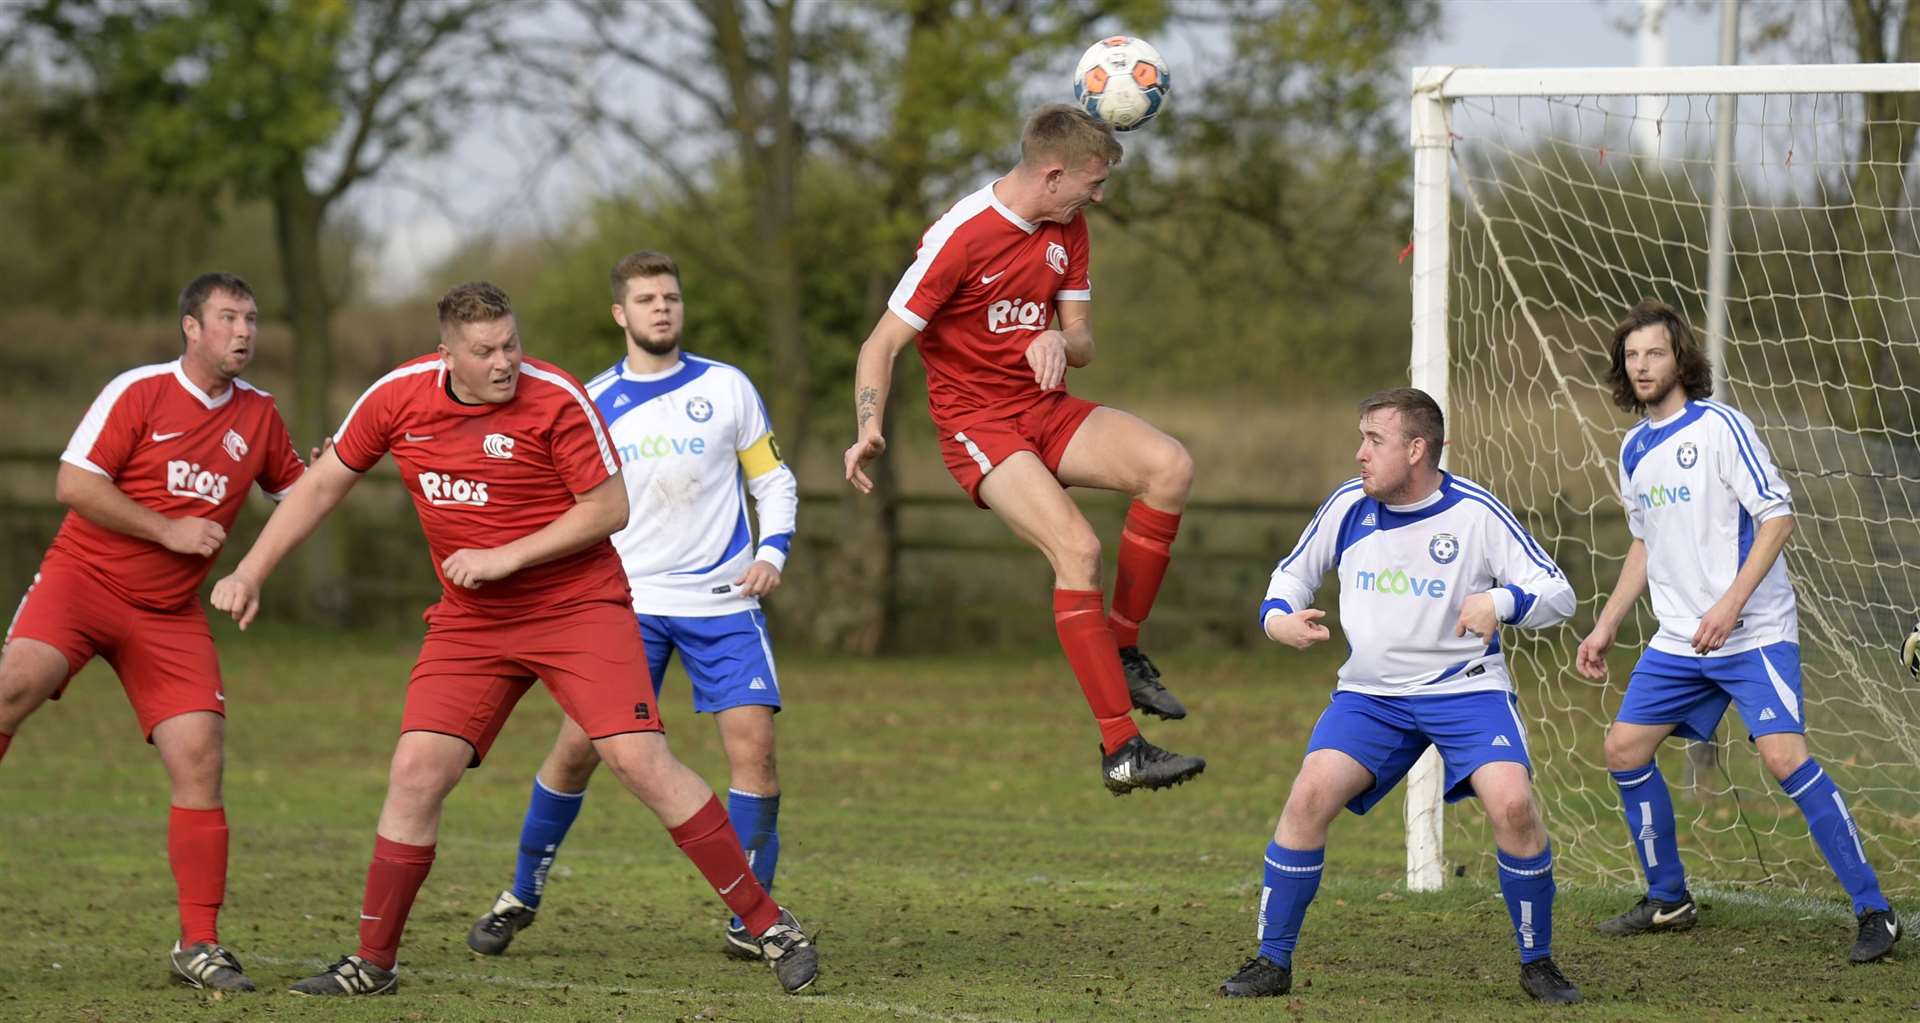 AFC Tigers (red) win a header in the penalty area against Moove. Picture: Barry Goodwin (42745140)